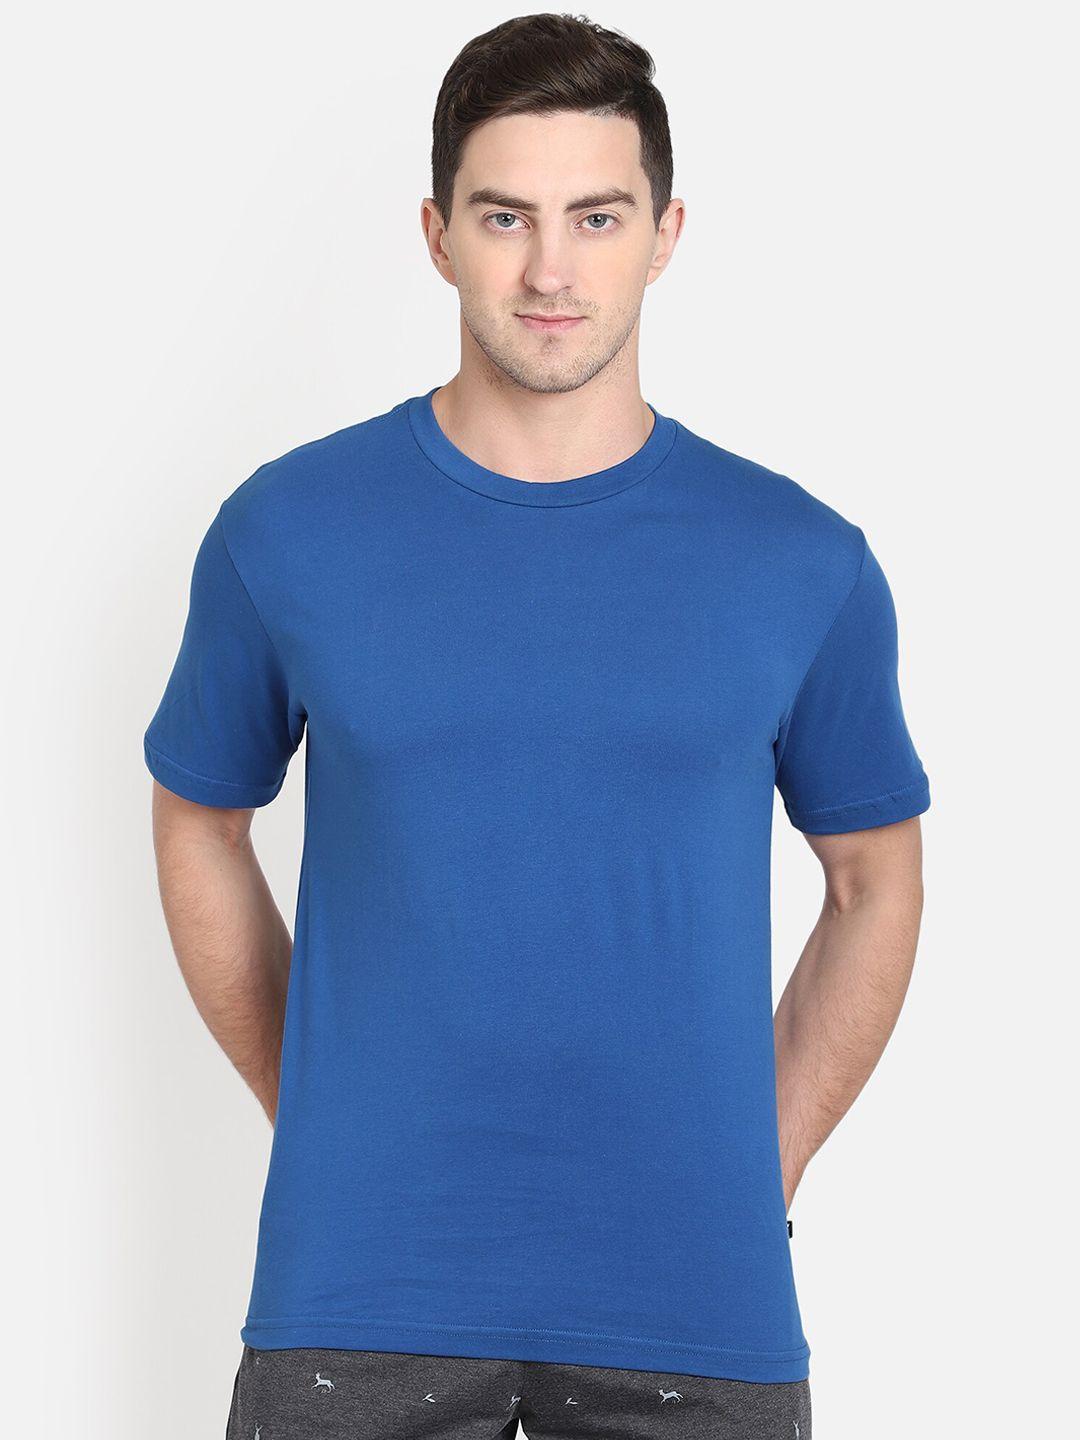 proteens men navy blue solid round neck t-shirt